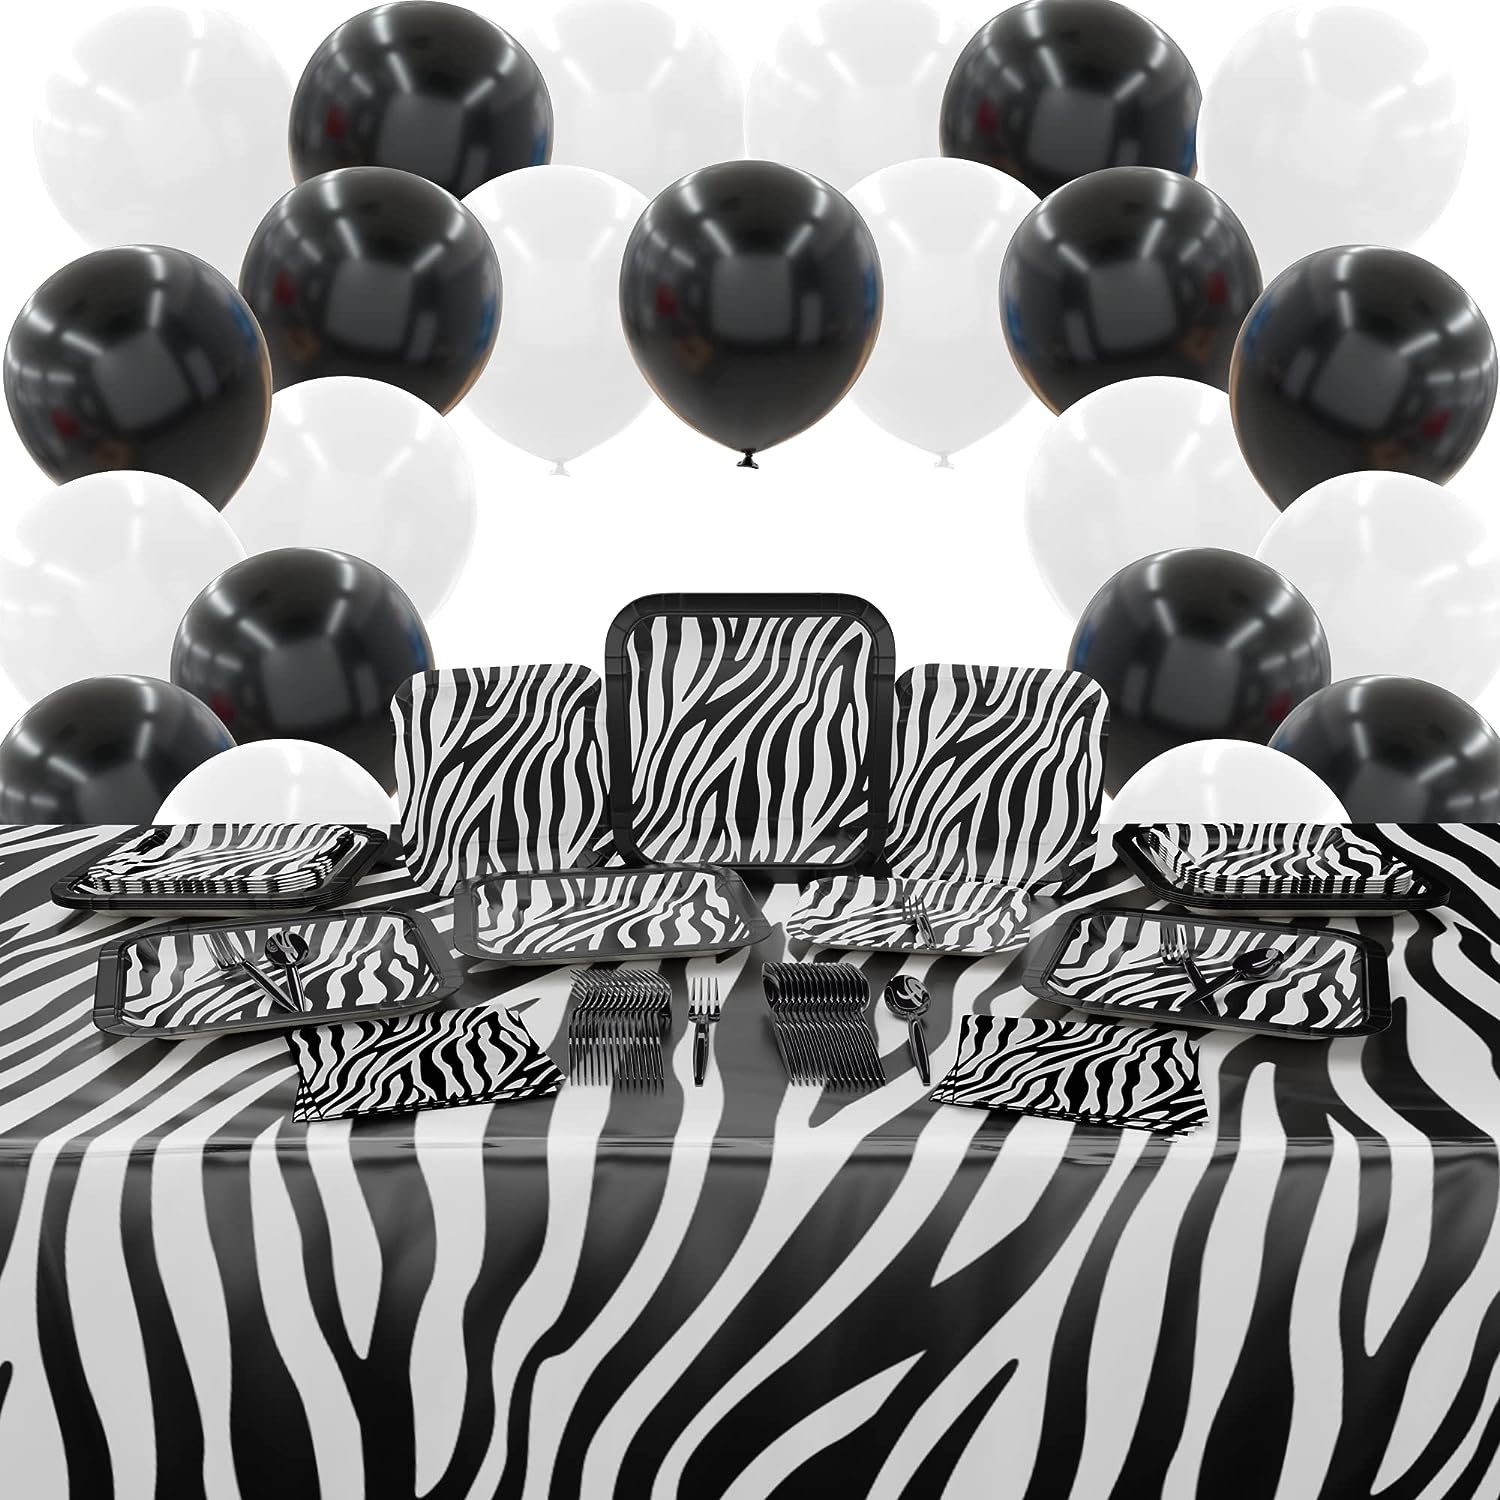 Zebra Stripe Deluxe Party Supplies Packs (Serves 16) includes 16 9-inch paper dinner plates, 16 7-inch paper dessert plates, 20 paper lunch napkins, 2 plastic table covers, 24 black plastic forks, 24 black plastic spoons, 10 black balloons, and 10 white balloons.